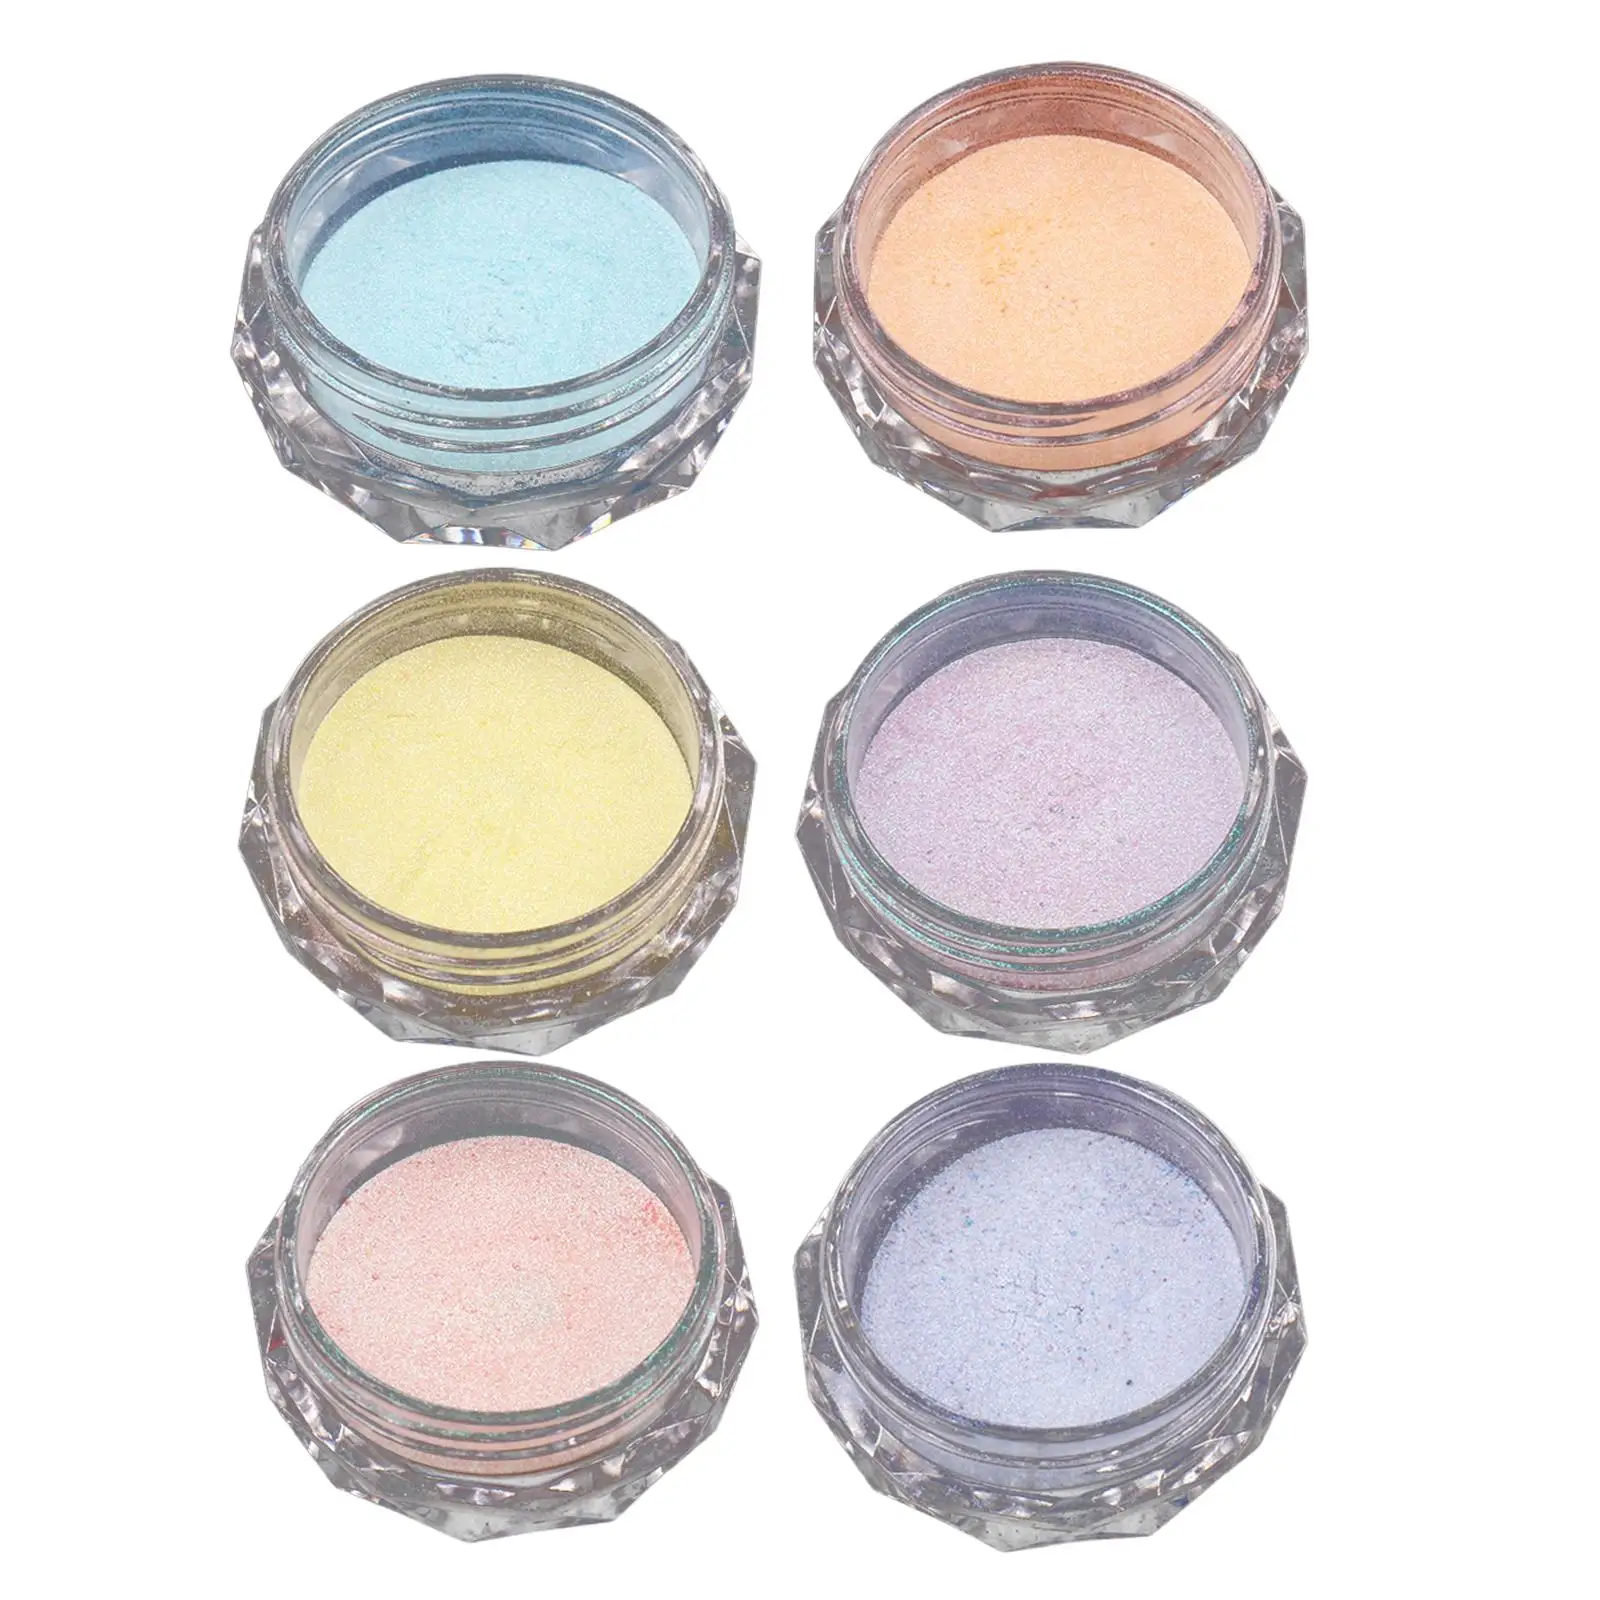 Chrome Nail Powder Iridescent Neon Powder Pearlescent for Professionals Home Use